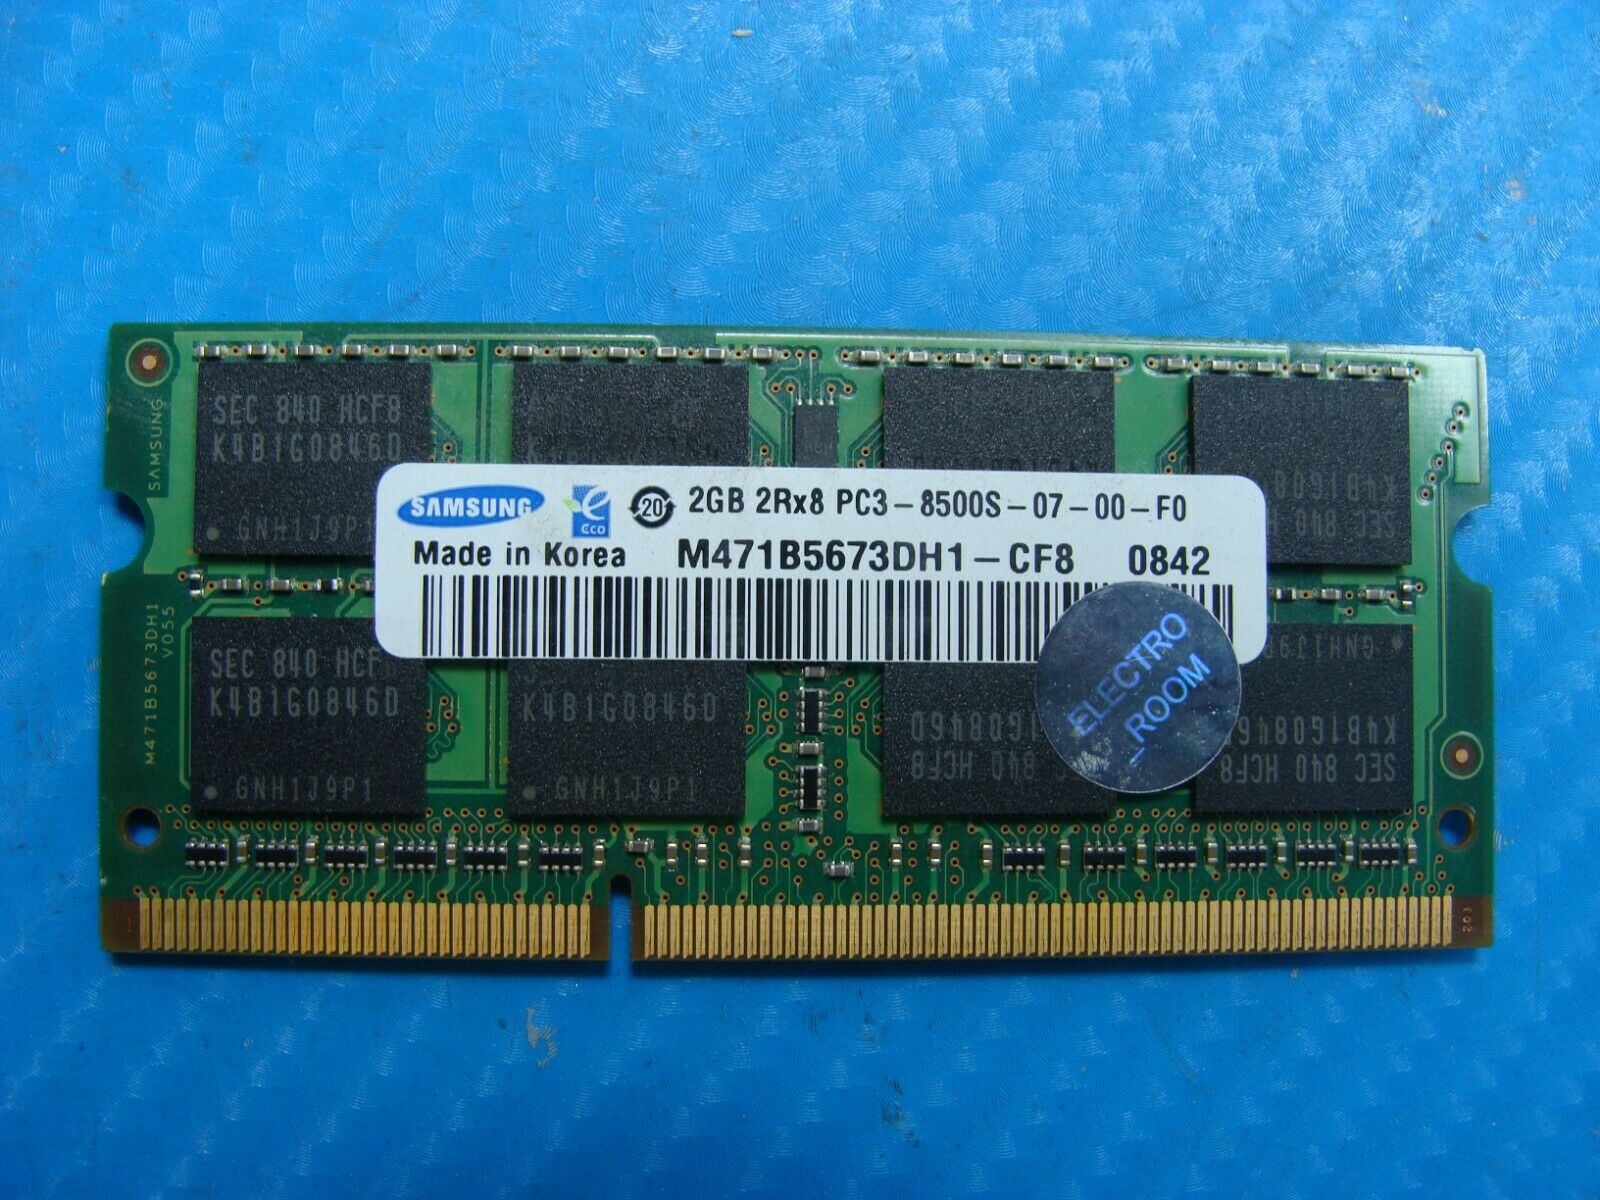 MacBook A1278 Samsung 2GB SO-DIMM Memory RAM PC3-8500S-07-00-F0 M471B5673DH1-CF8 - Laptop Parts - Buy Authentic Computer Parts - Top Seller Ebay